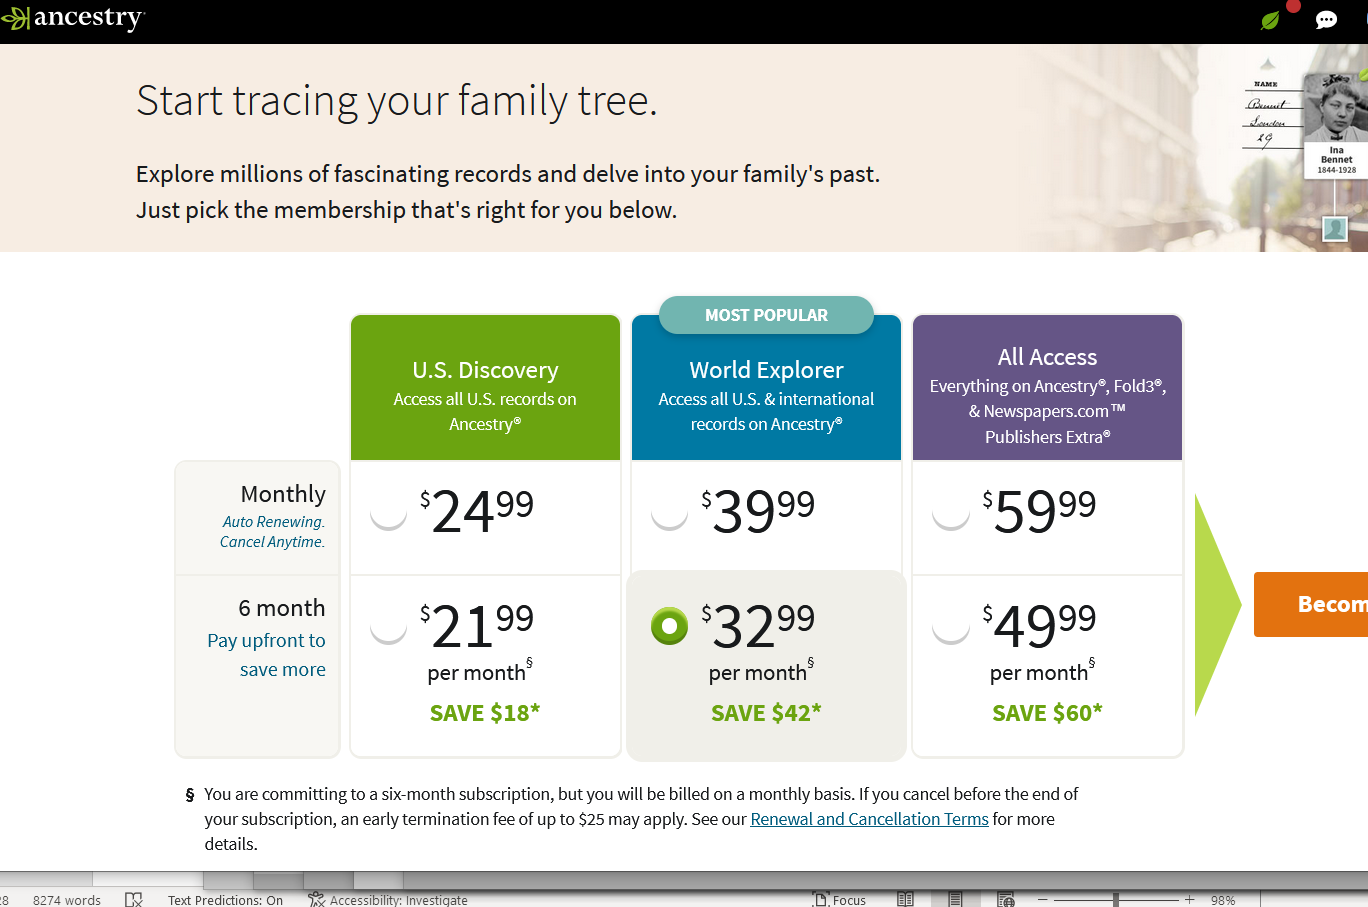 How Much Does Ancestry Cost?